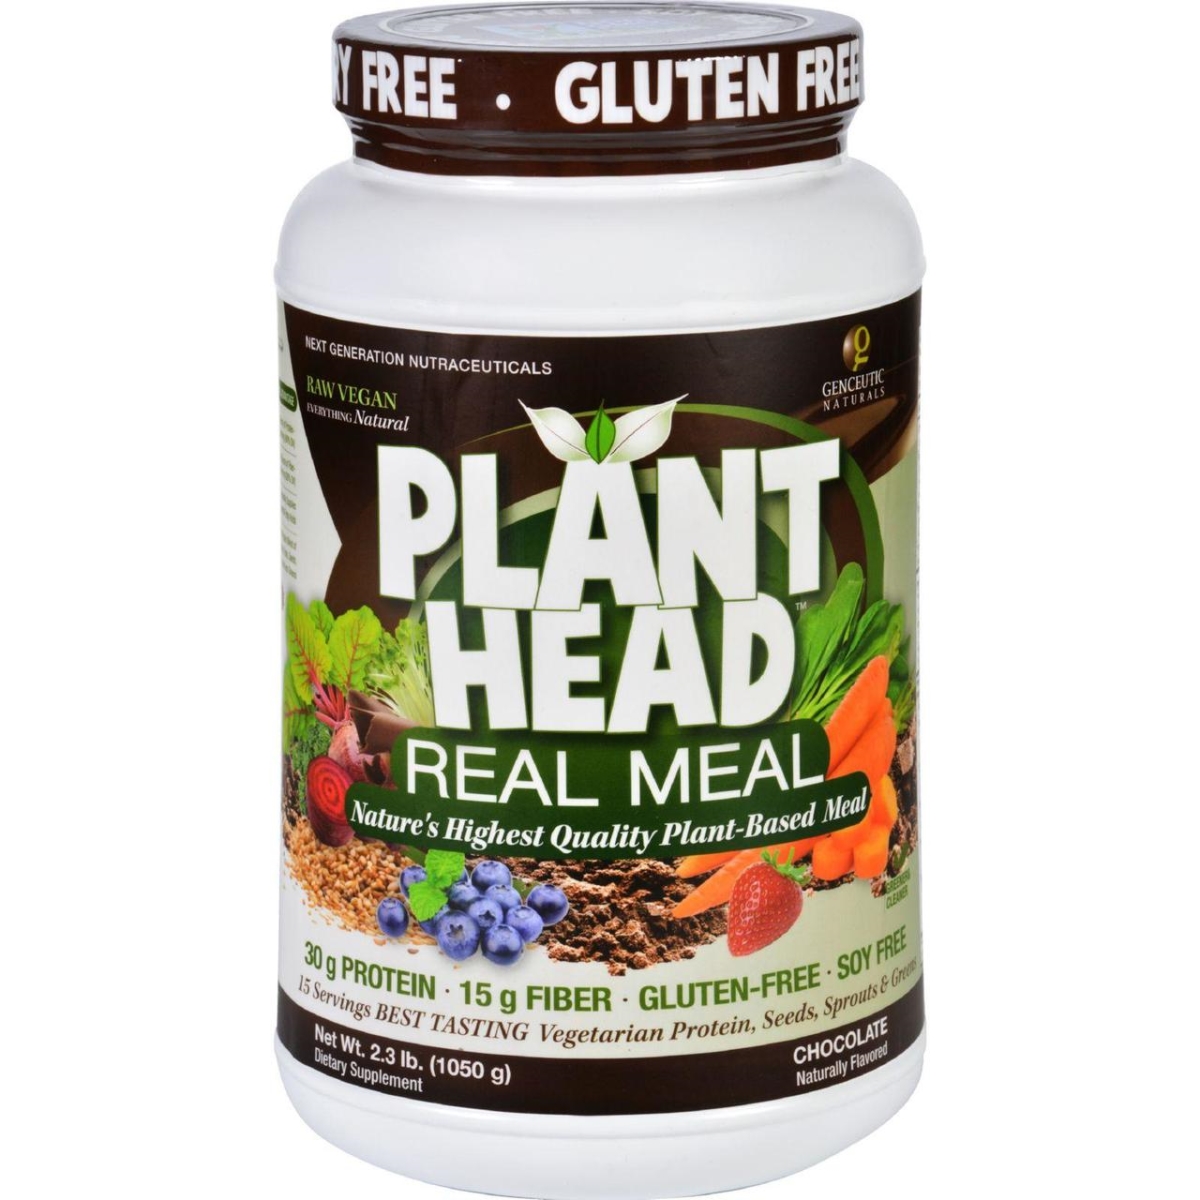 Hg1620277 2.3 Lbs Plant Head Real Meal, Chocolate